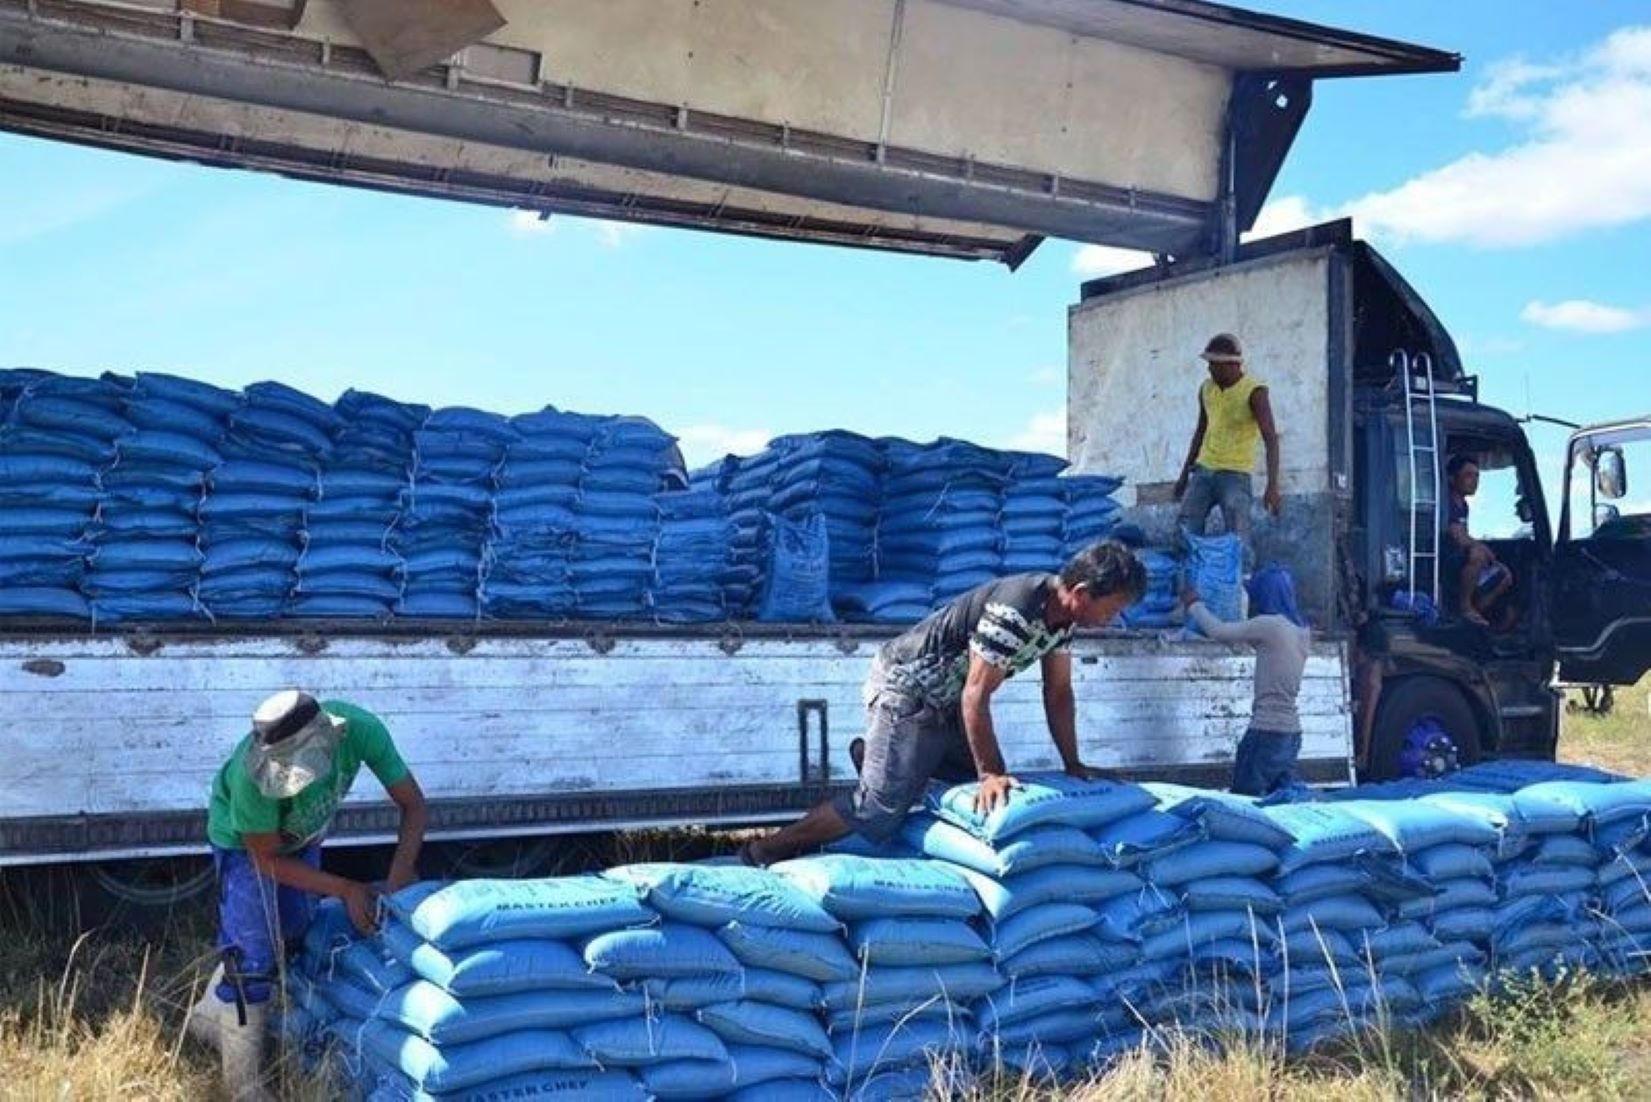 Philippines Suspends Over 130 Officials Over Rice Sale Scandal